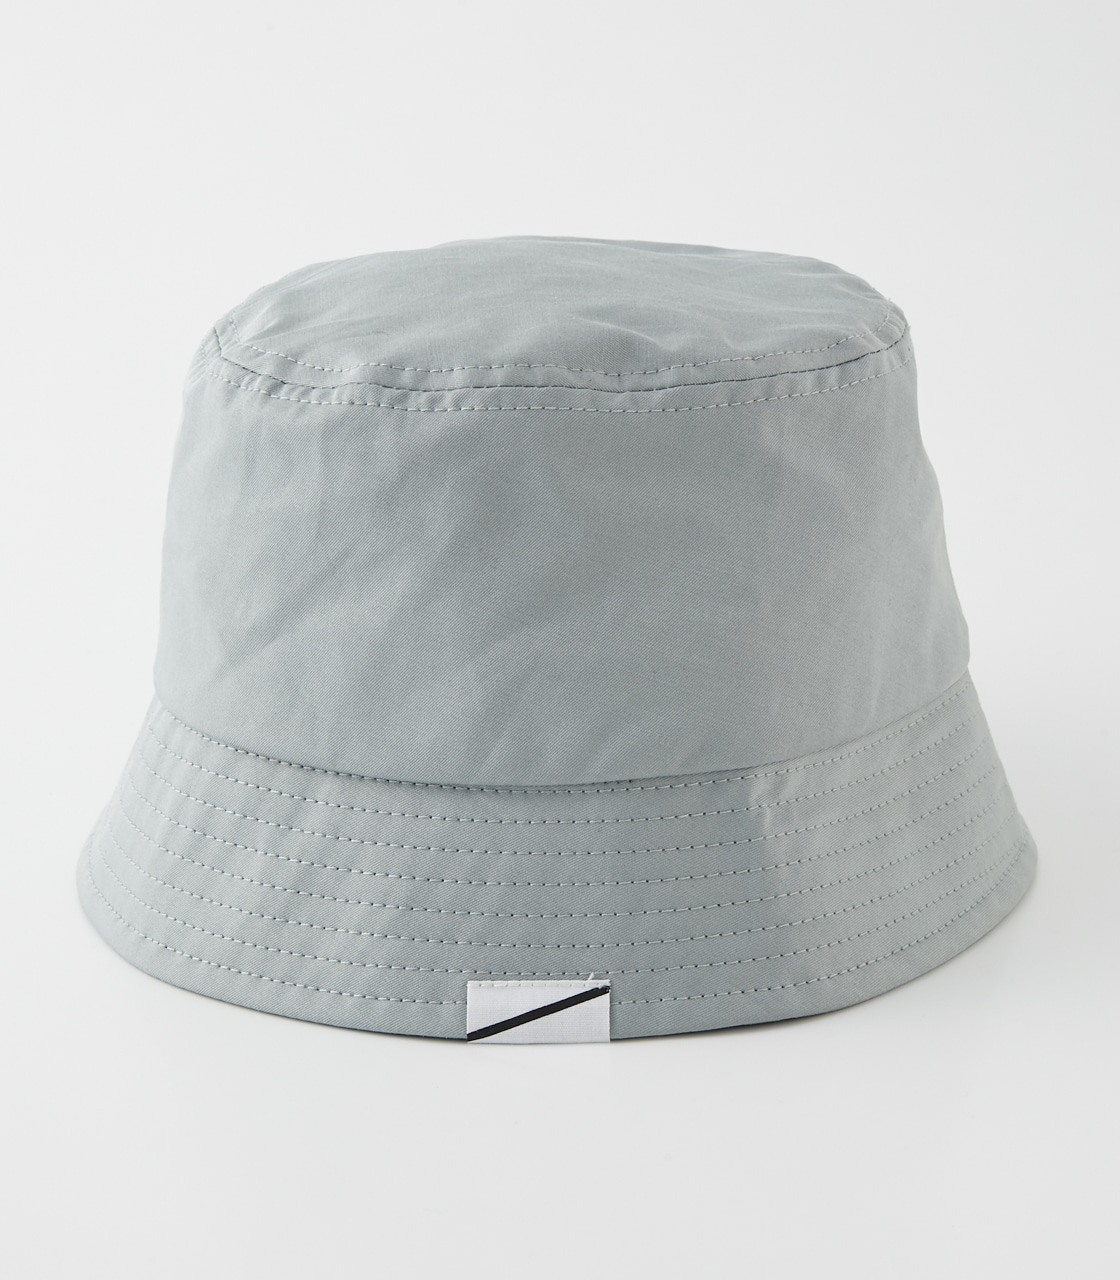 COMPACT DEEPLY BUCKET HAT/コンパクトディープリーバケットハット 詳細画像 L/GRY 2